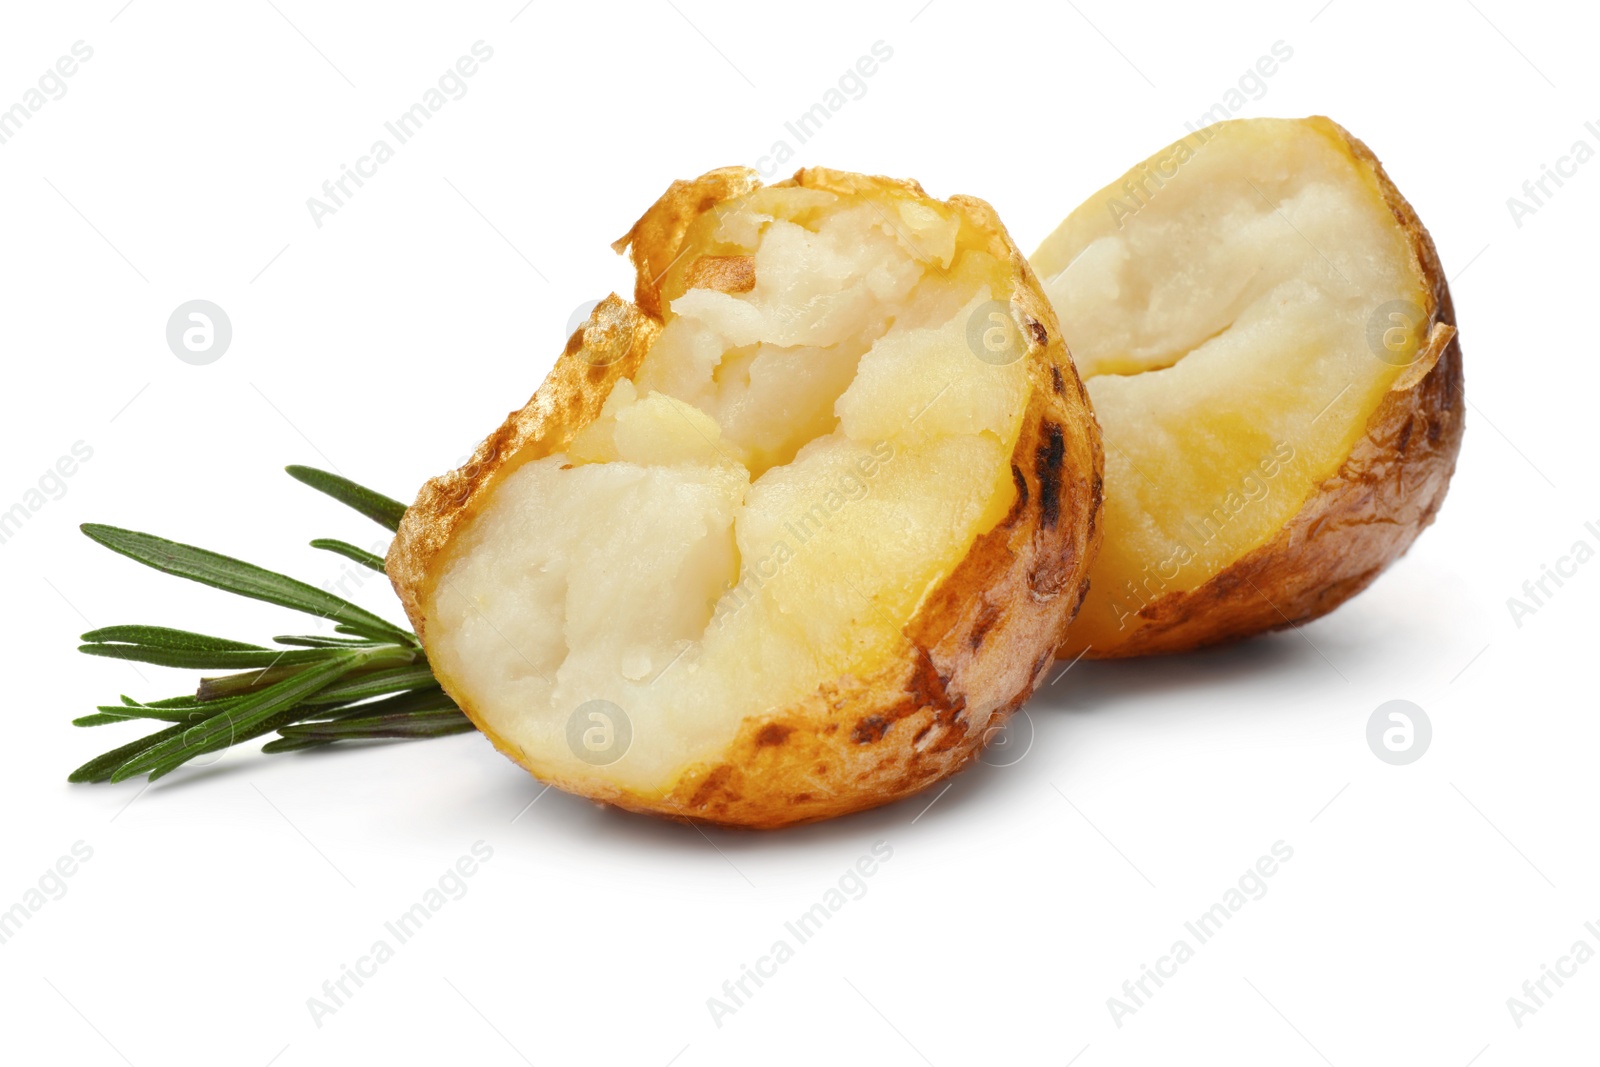 Photo of Tasty pieces of baked potato and rosemary on white background